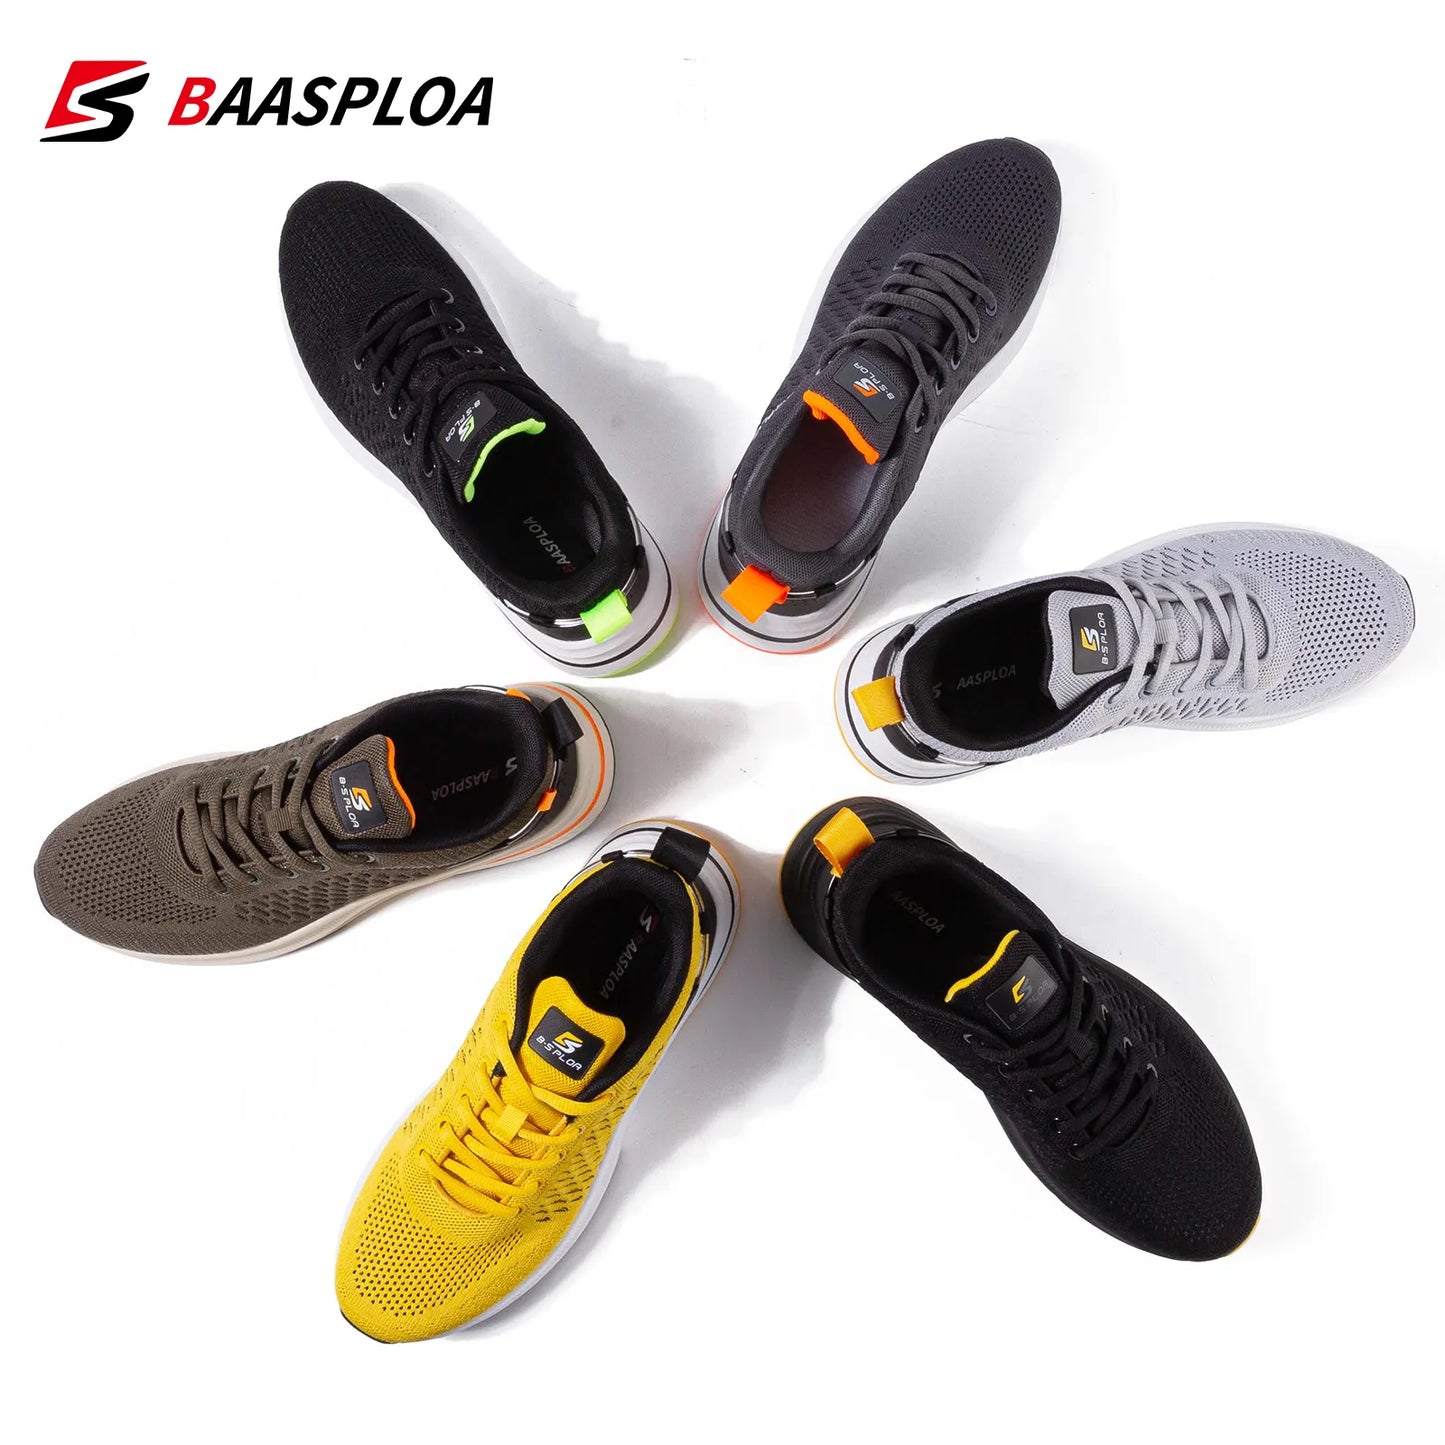 Knit Casual Walking Shoes Breathable Sneakers Light Shock Absorption Male Tennis Shoe - TaMNz